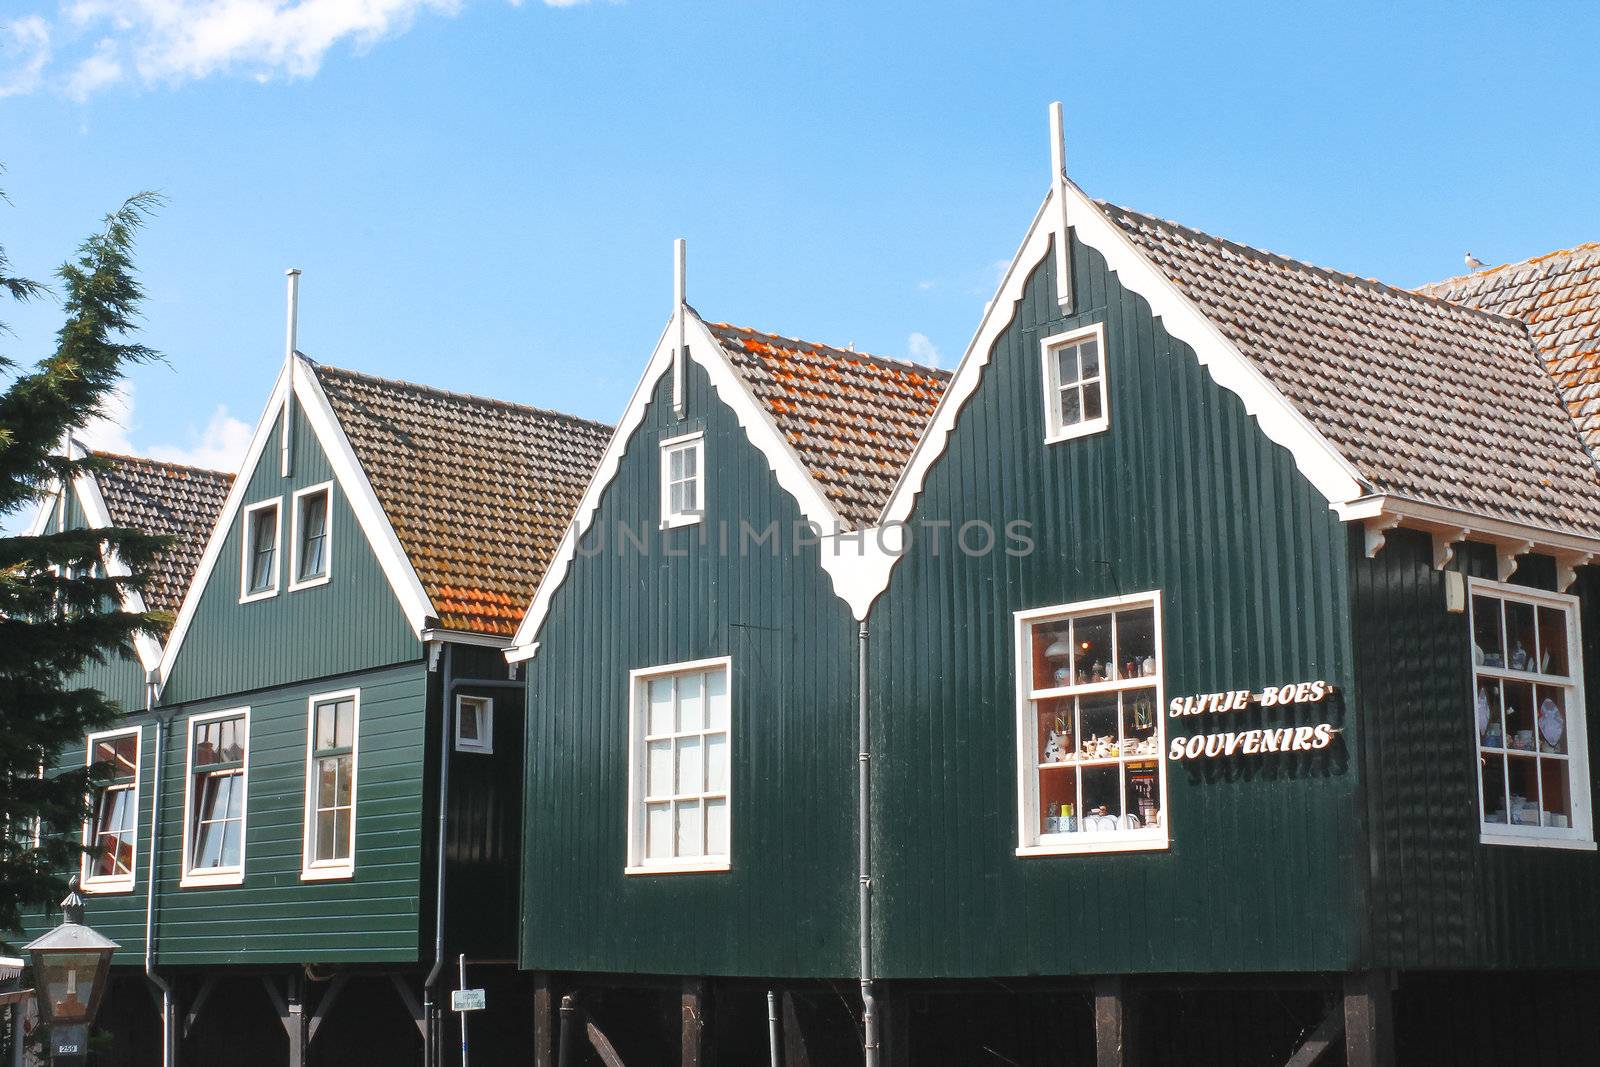 Gift shop on the island of Marken. Netherlands by NickNick